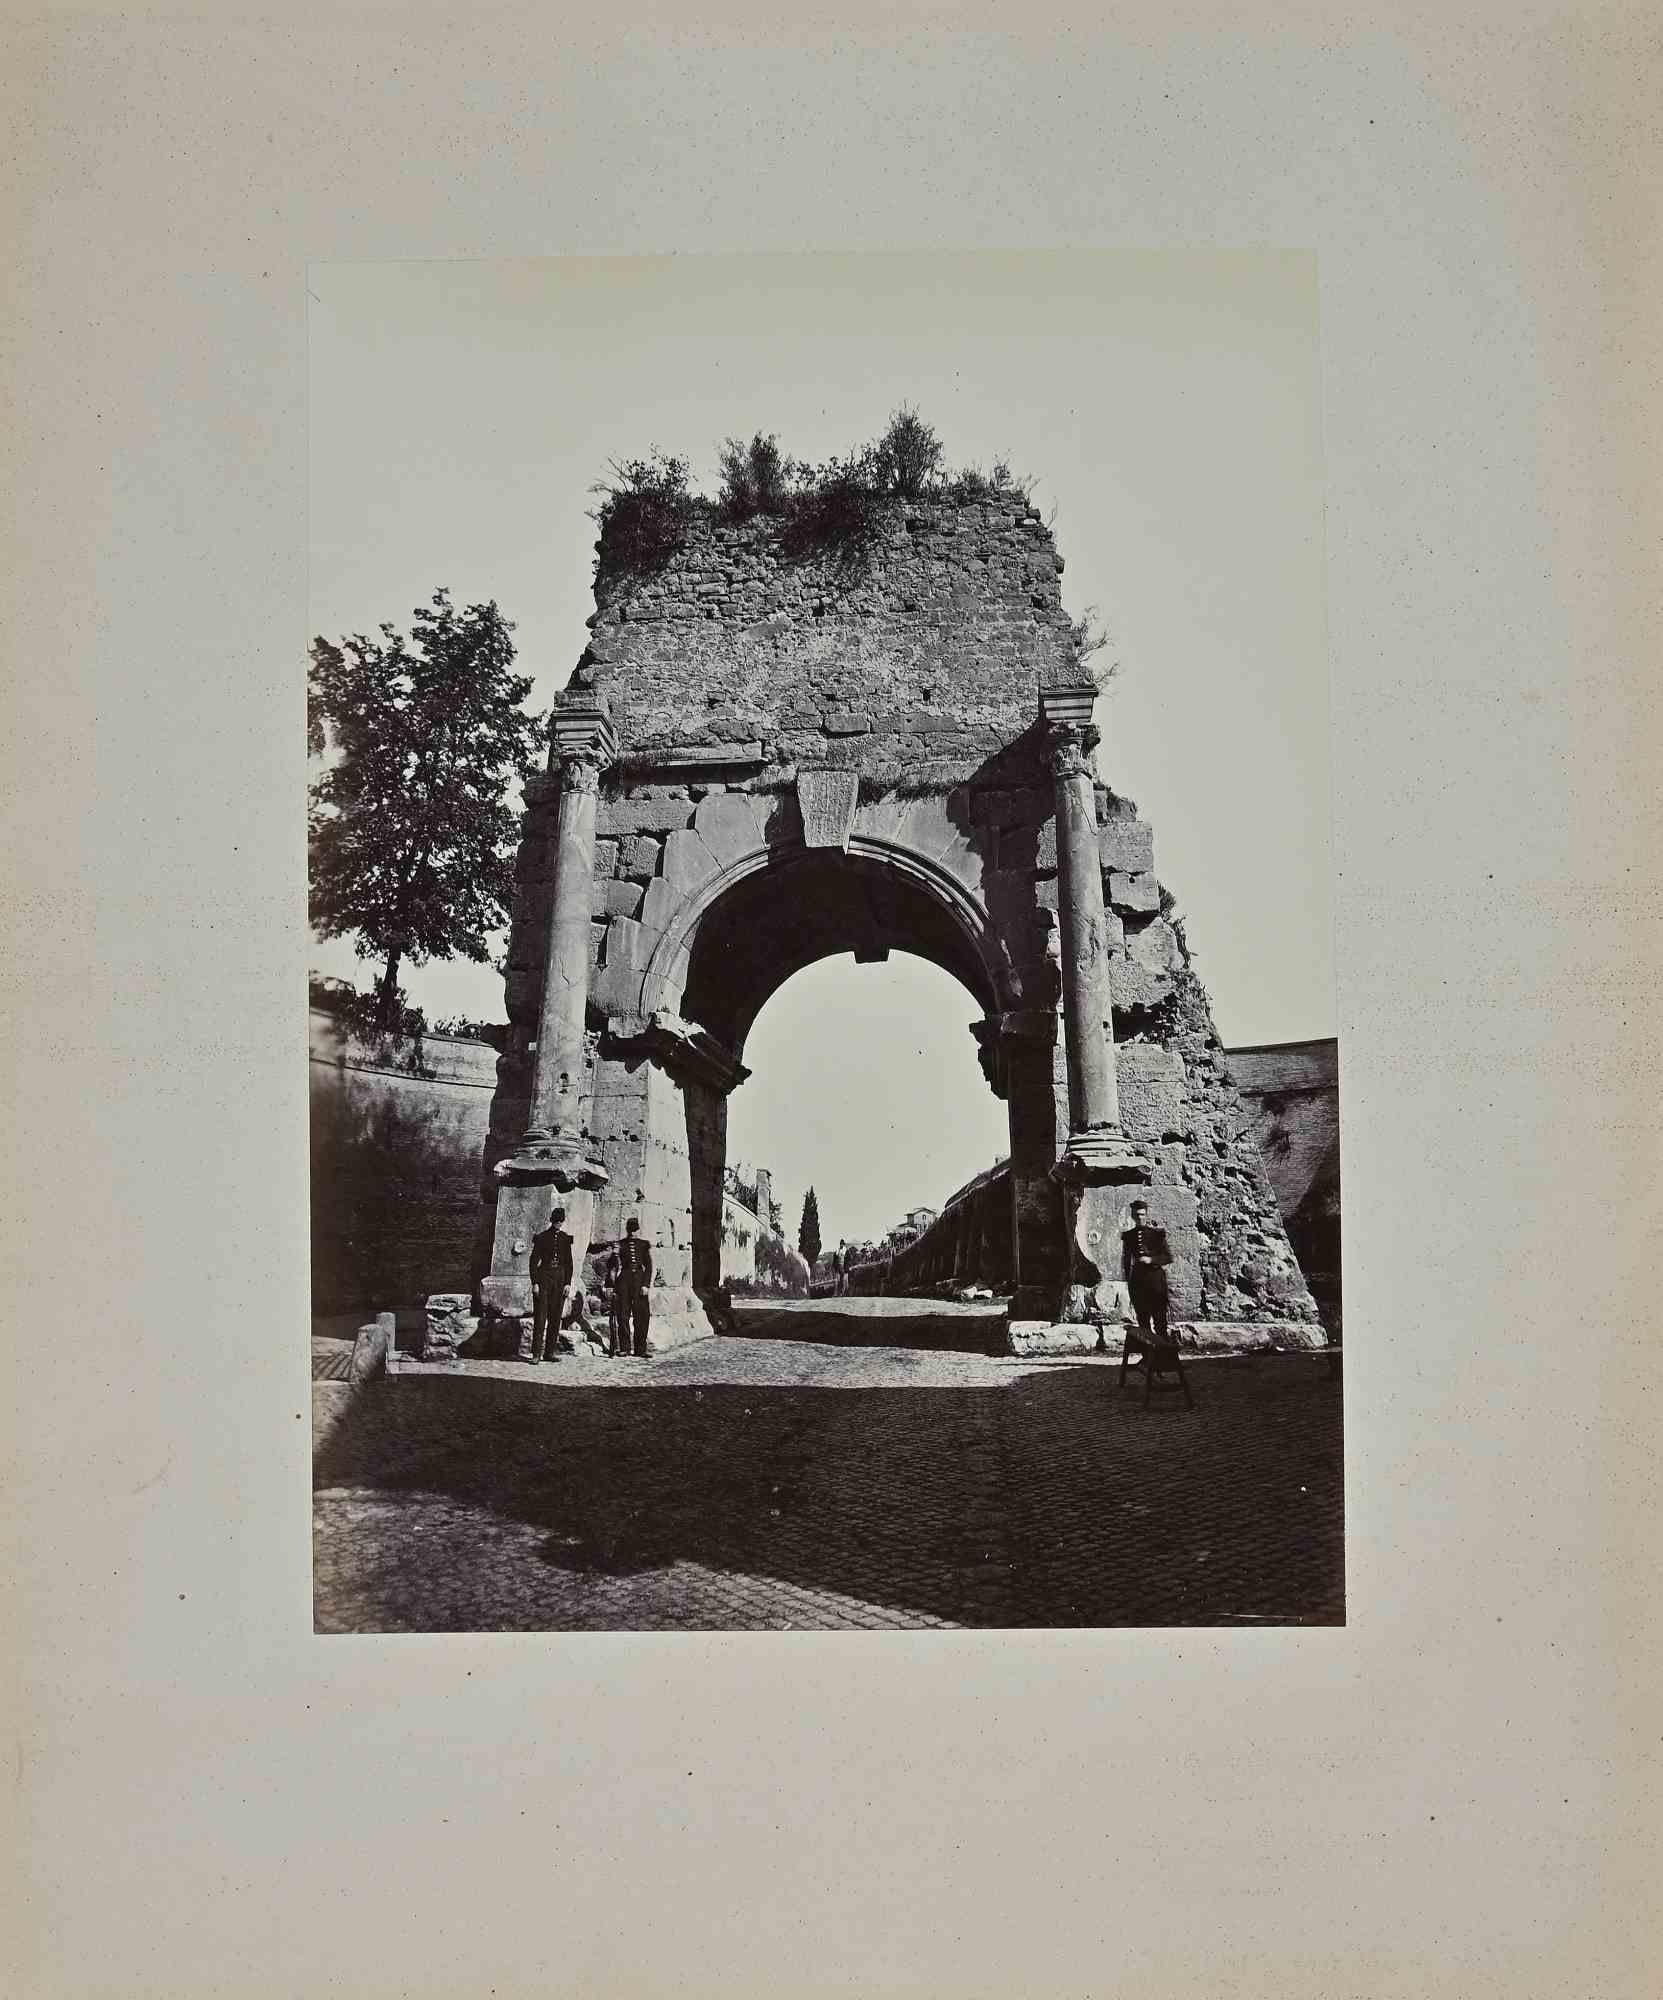 Francesco Sidoli Landscape Photograph - Ancient View of Rome - Photograph by F. Sidoli - Late 19th Century